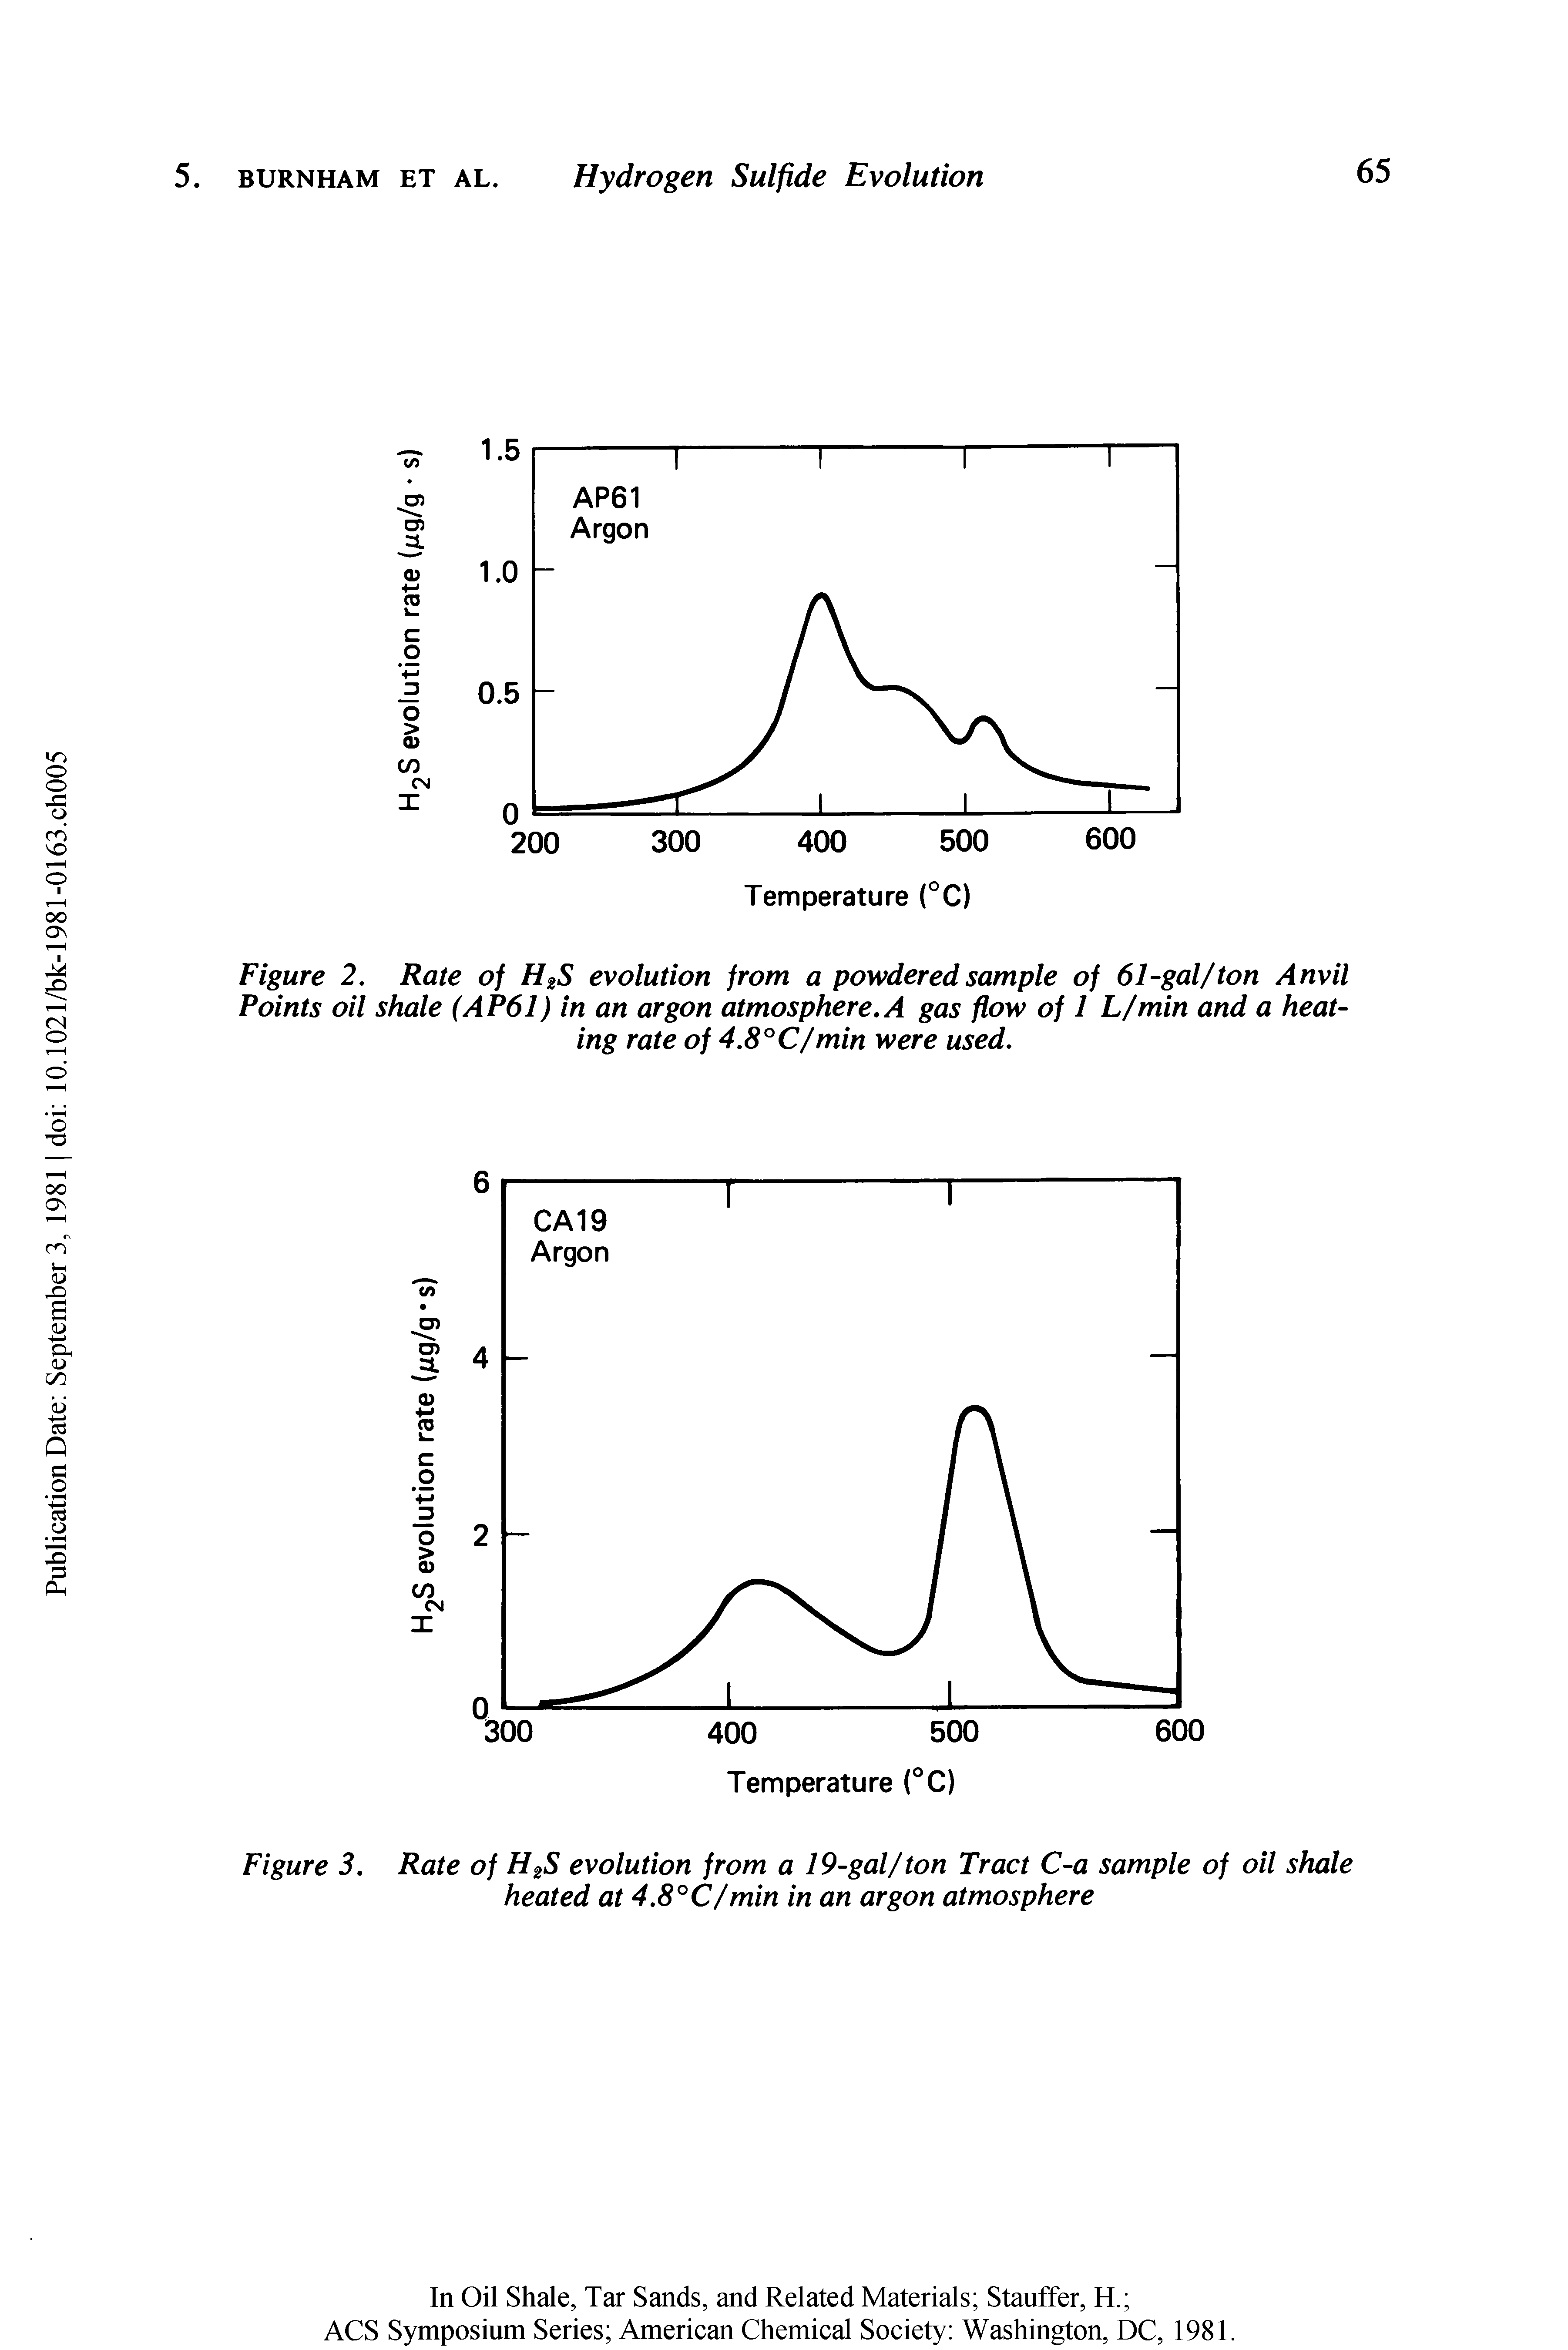 Figure 2. Rate of H2S evolution from a powdered sample of 61-gal/ton Anvil Points oil shale (AP61) in an argon atmosphere. A gas flow of 1 L/min and a heating rate of 4.8°C/min were used.